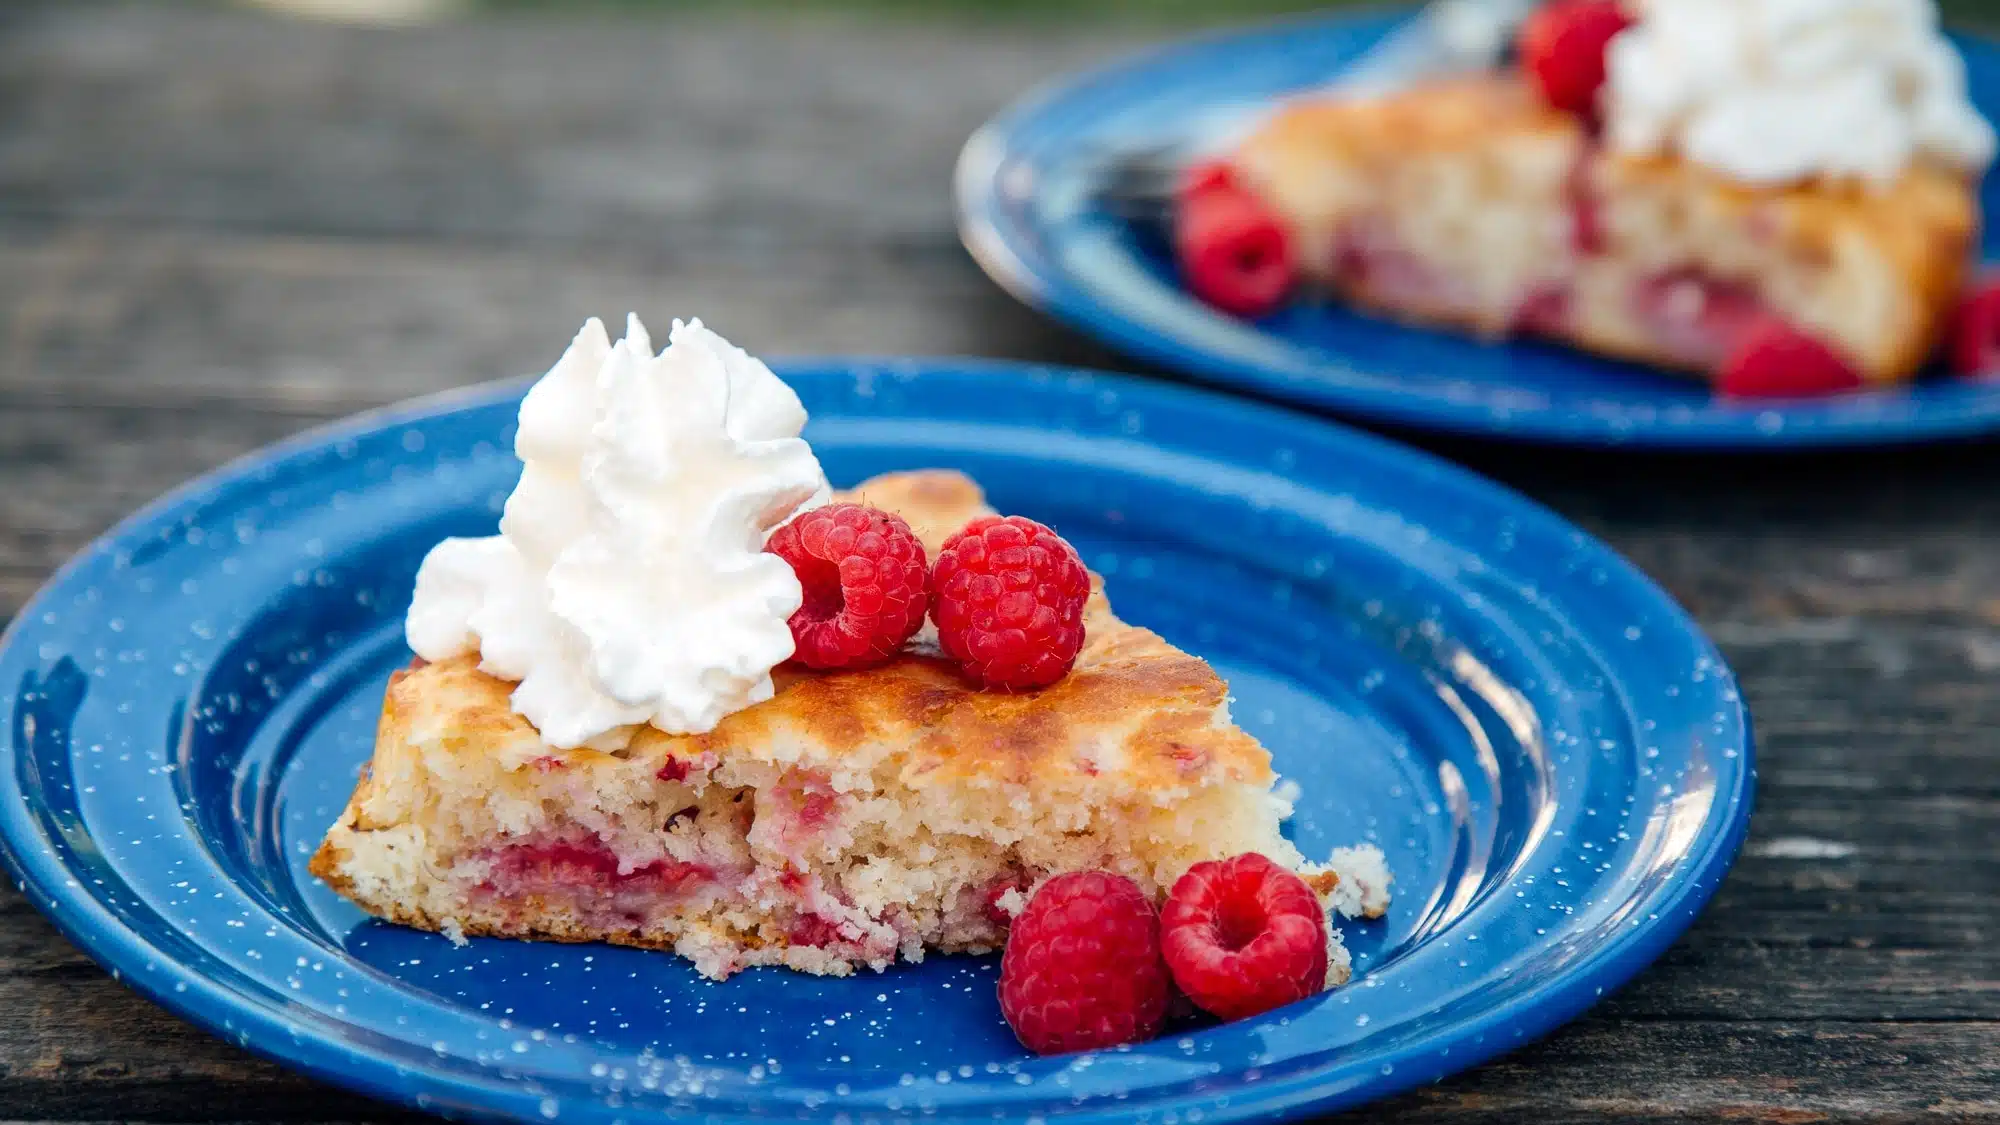 A slice of cake topped with whipped cream and whole raspberries.